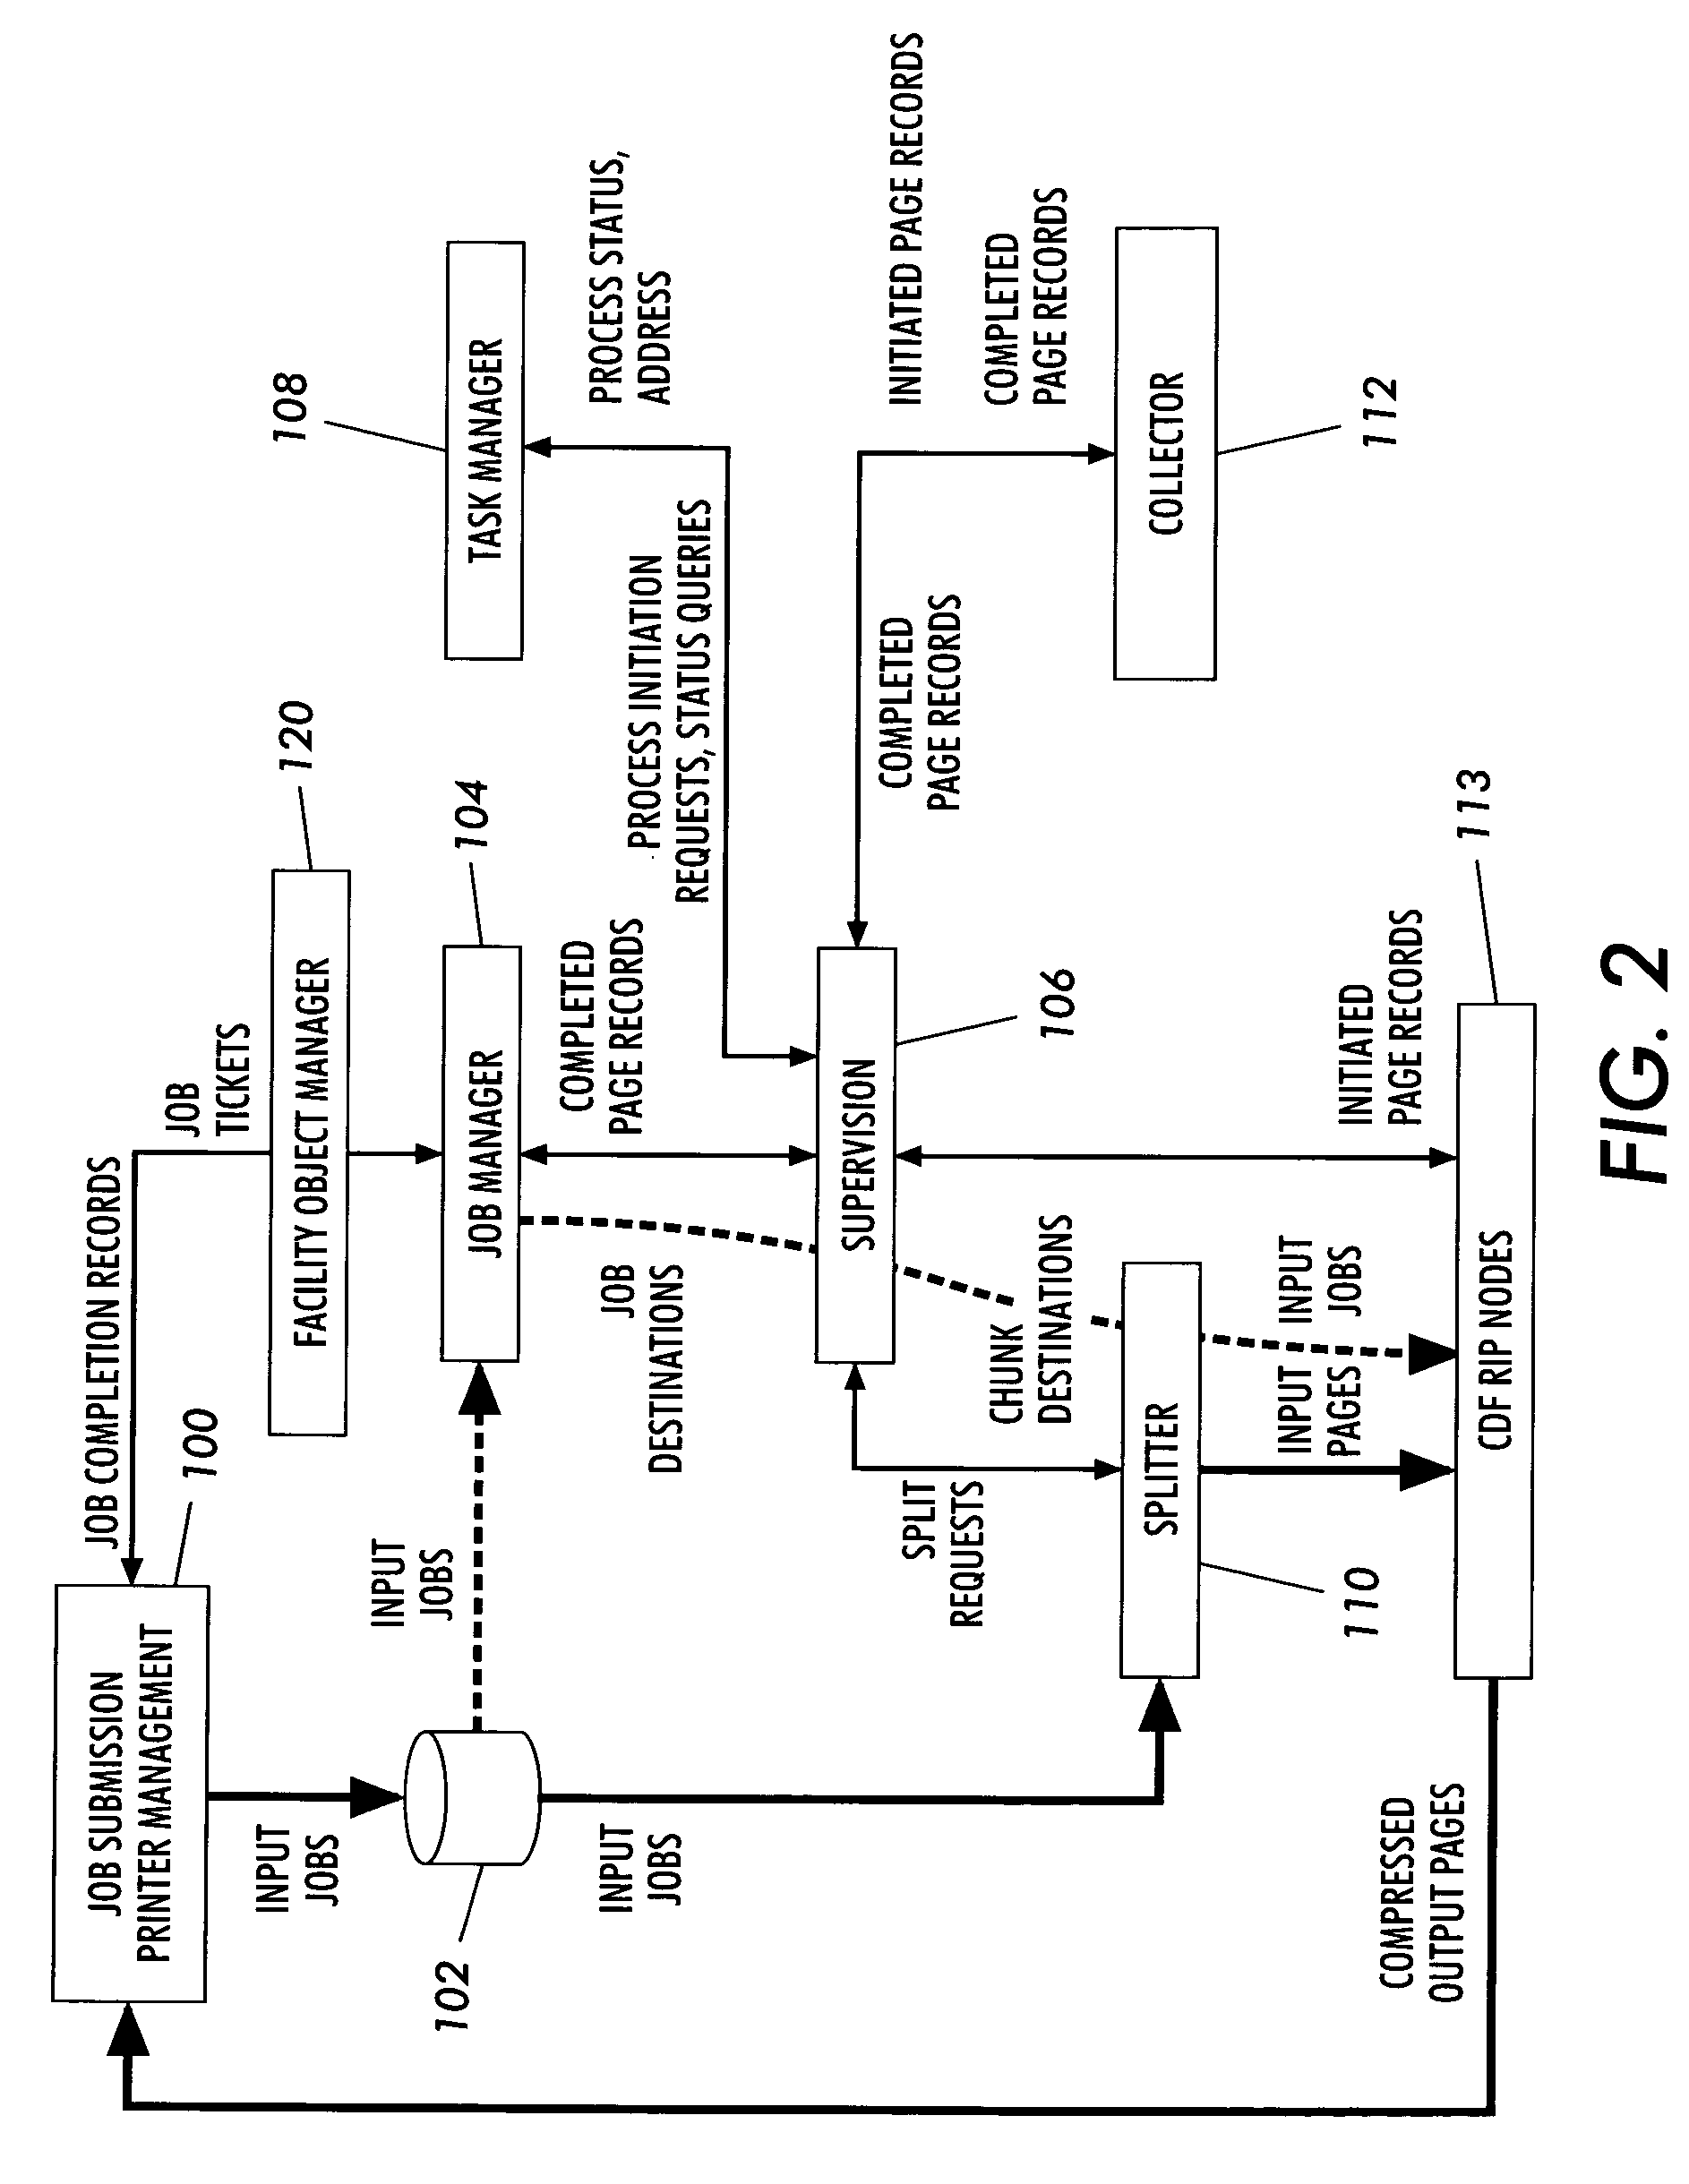 Parallel printing system having modes for auto-recovery, auto-discovery of resources, and parallel processing of unprotected postscript jobs